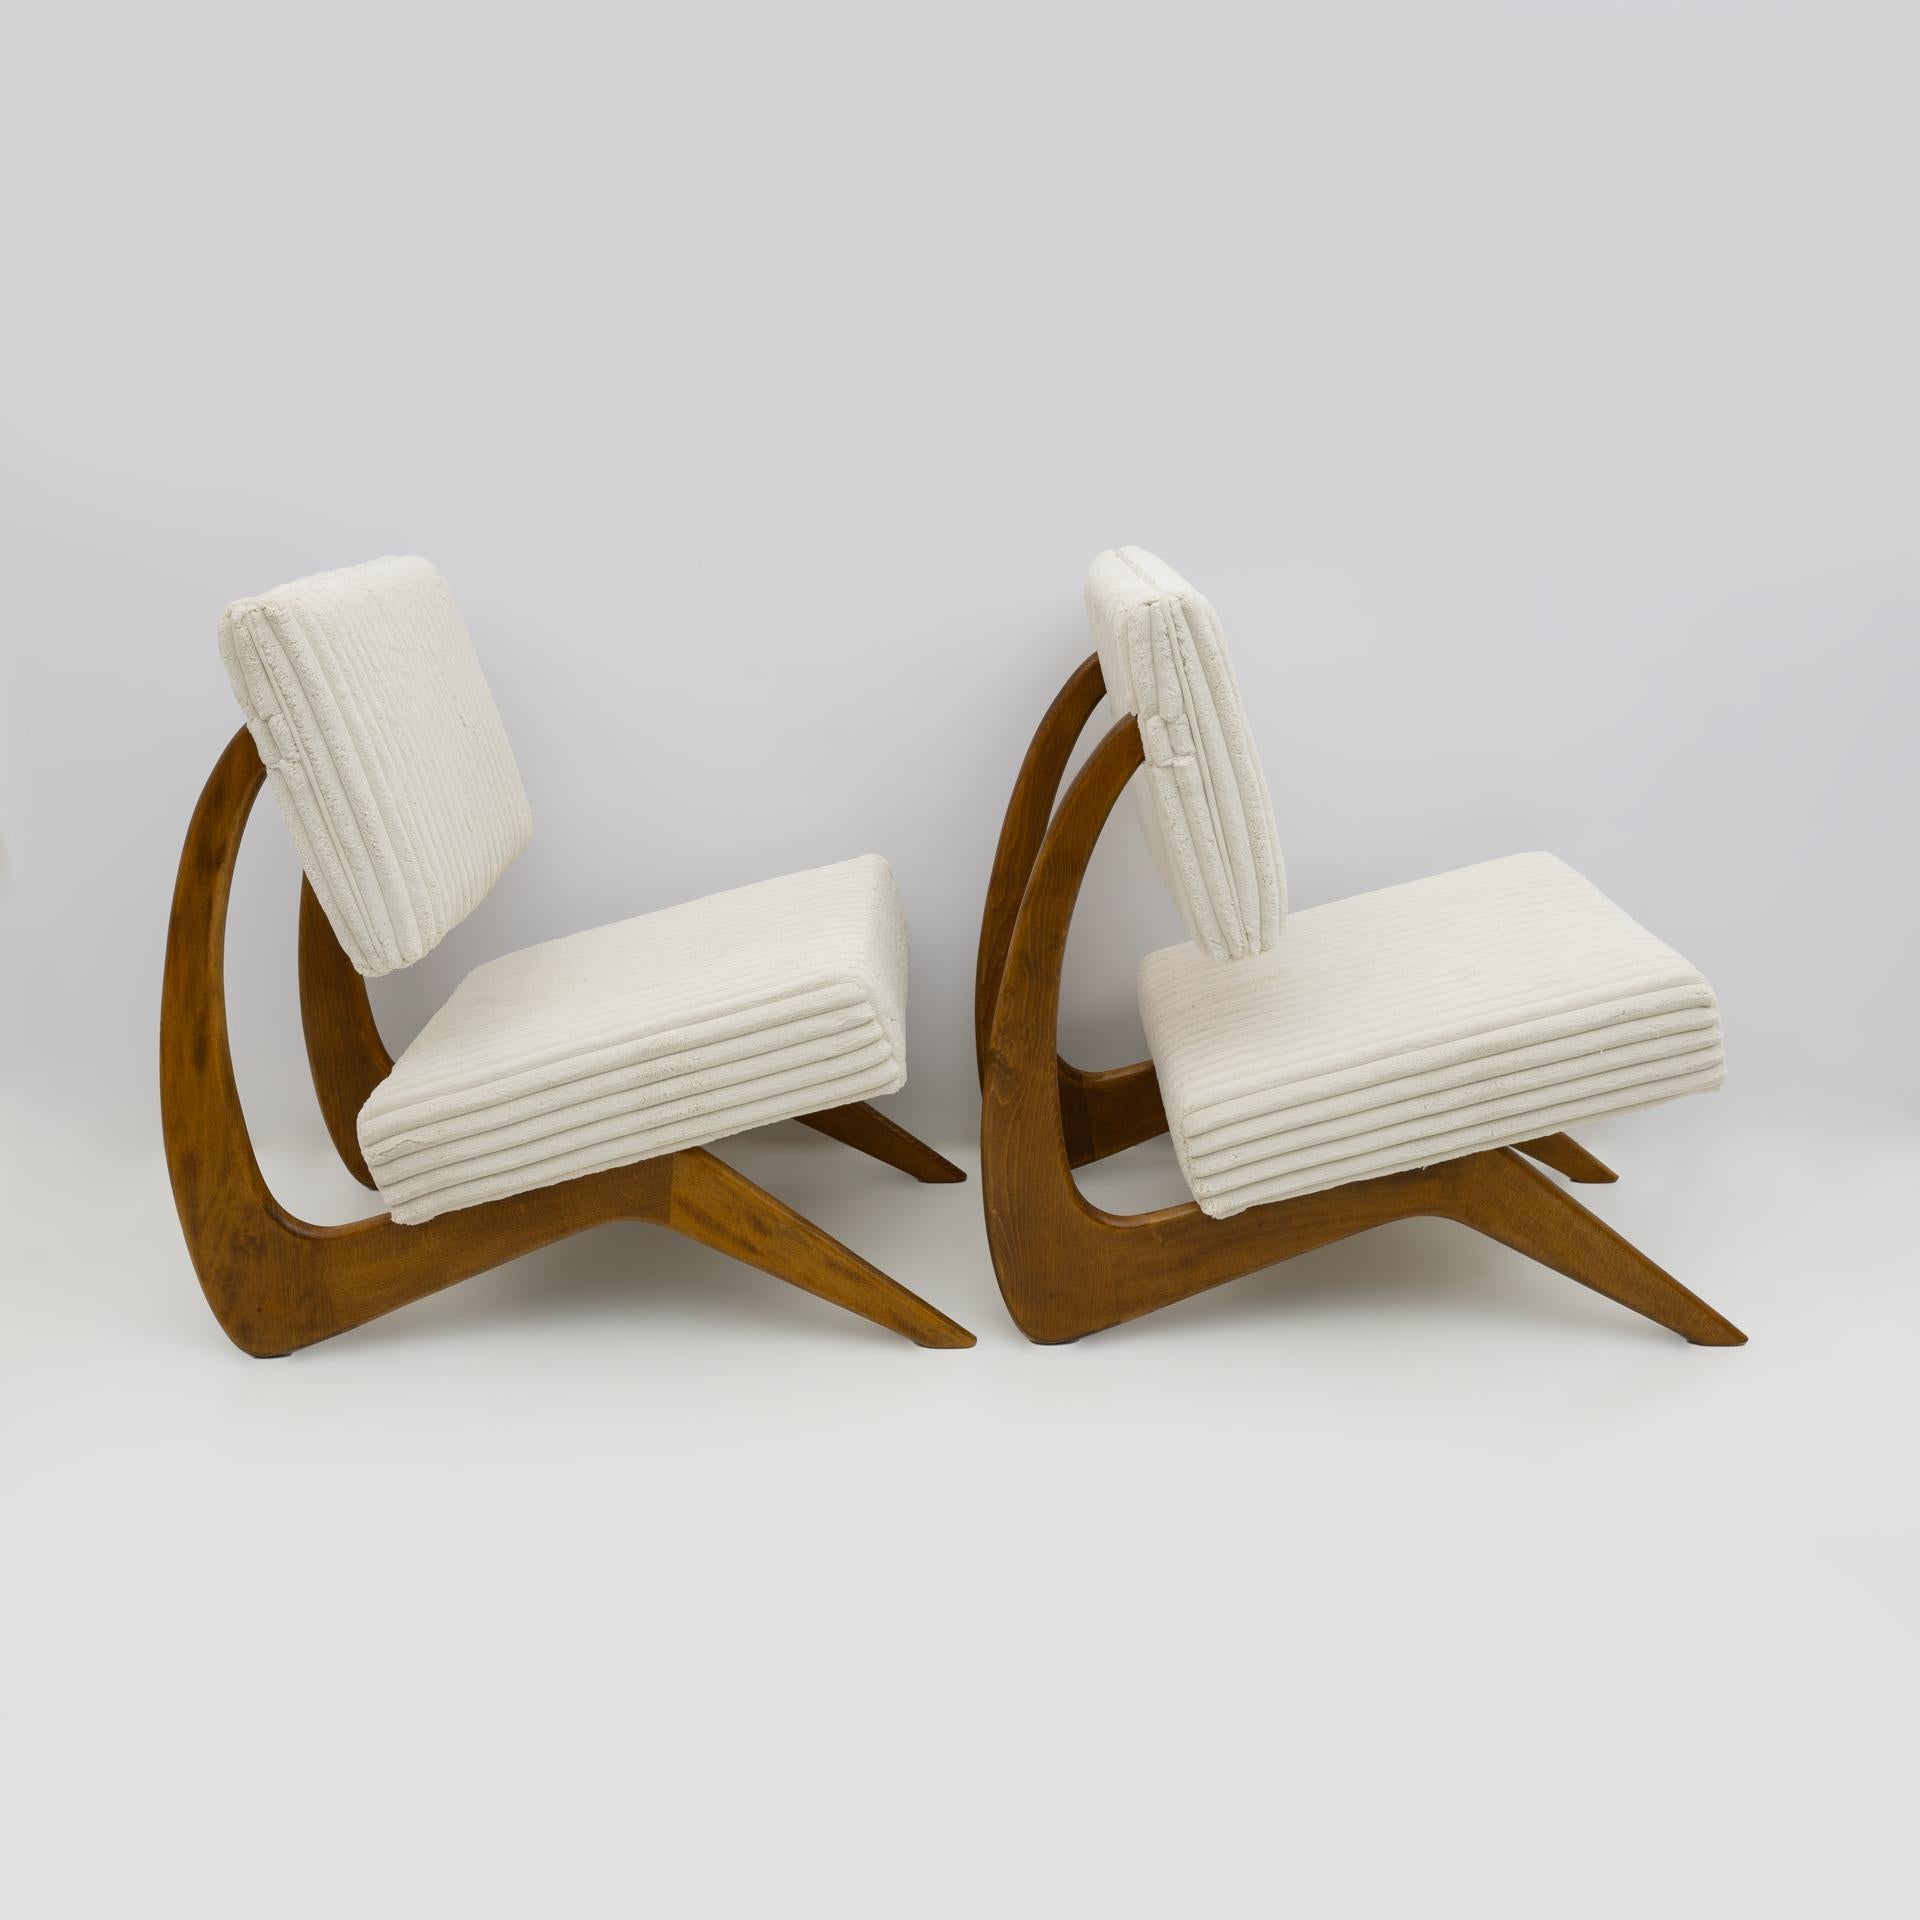 Mid-20th Century Pair of Adrian Pearsall Midcentury Walnut Lounge Chairs for Craft Associates For Sale